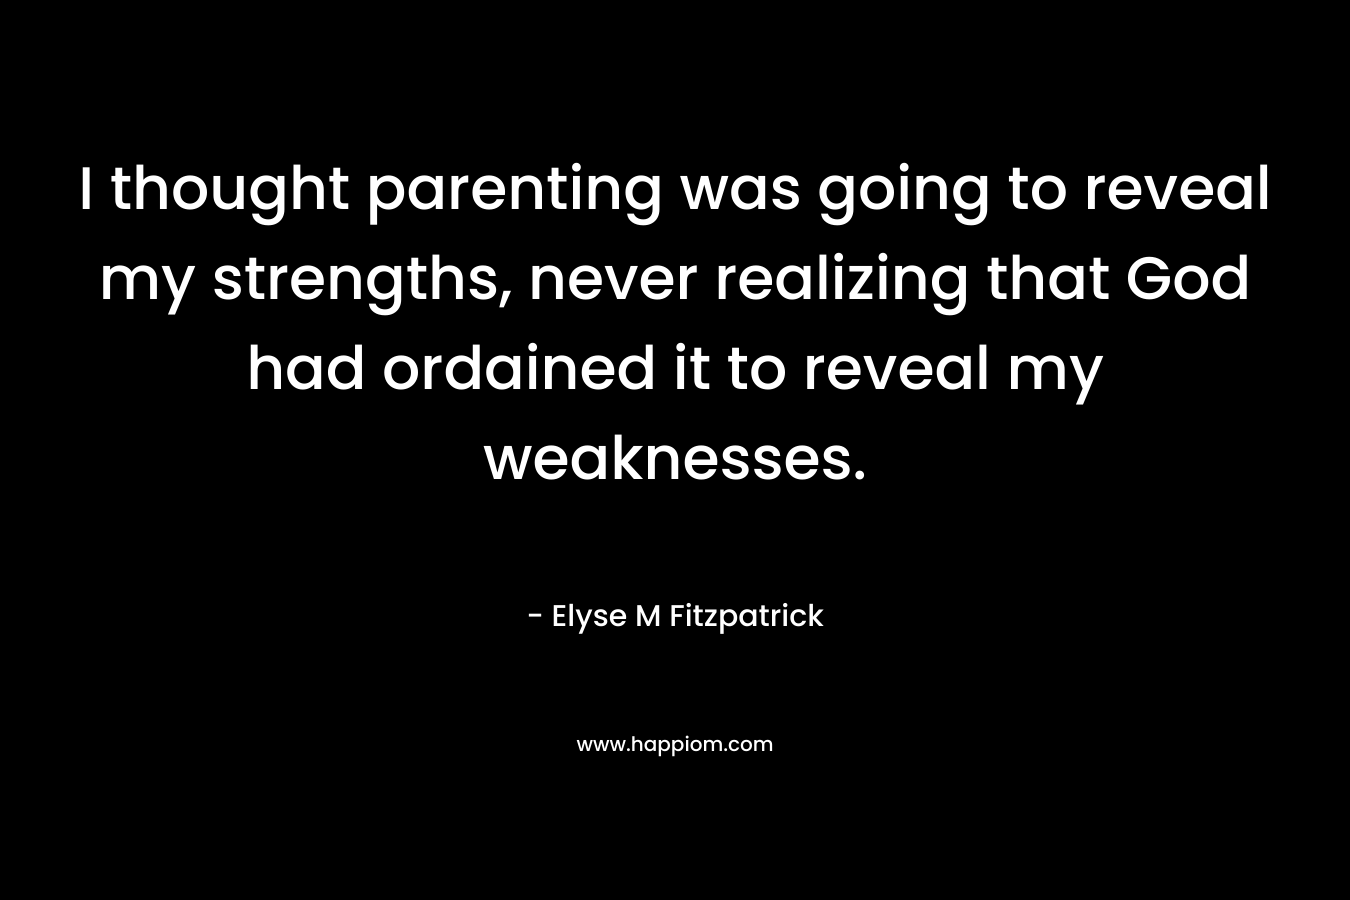 I thought parenting was going to reveal my strengths, never realizing that God had ordained it to reveal my weaknesses.